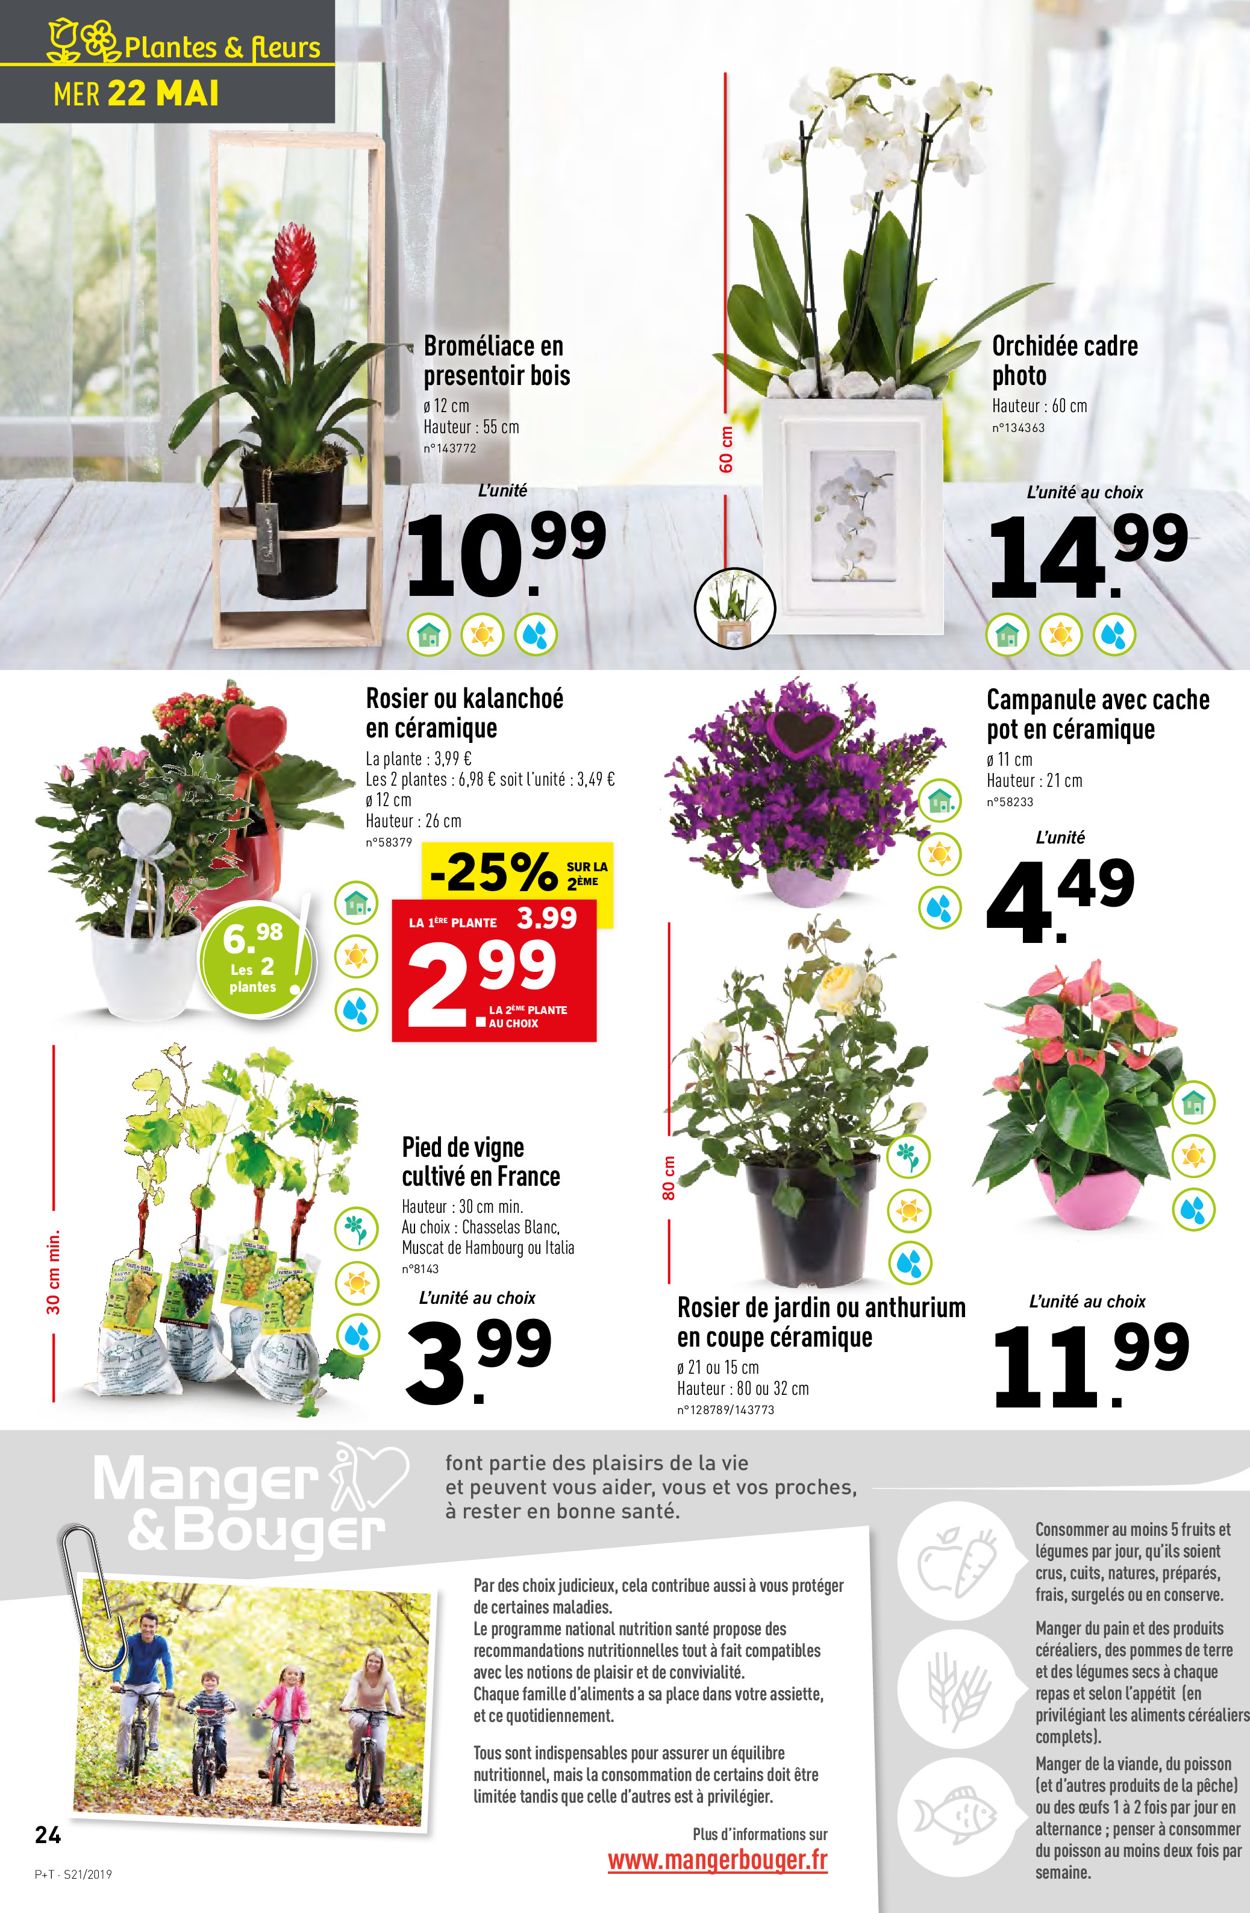 Lidl Catalogue - 22.05-28.05.2019 (Page 24)